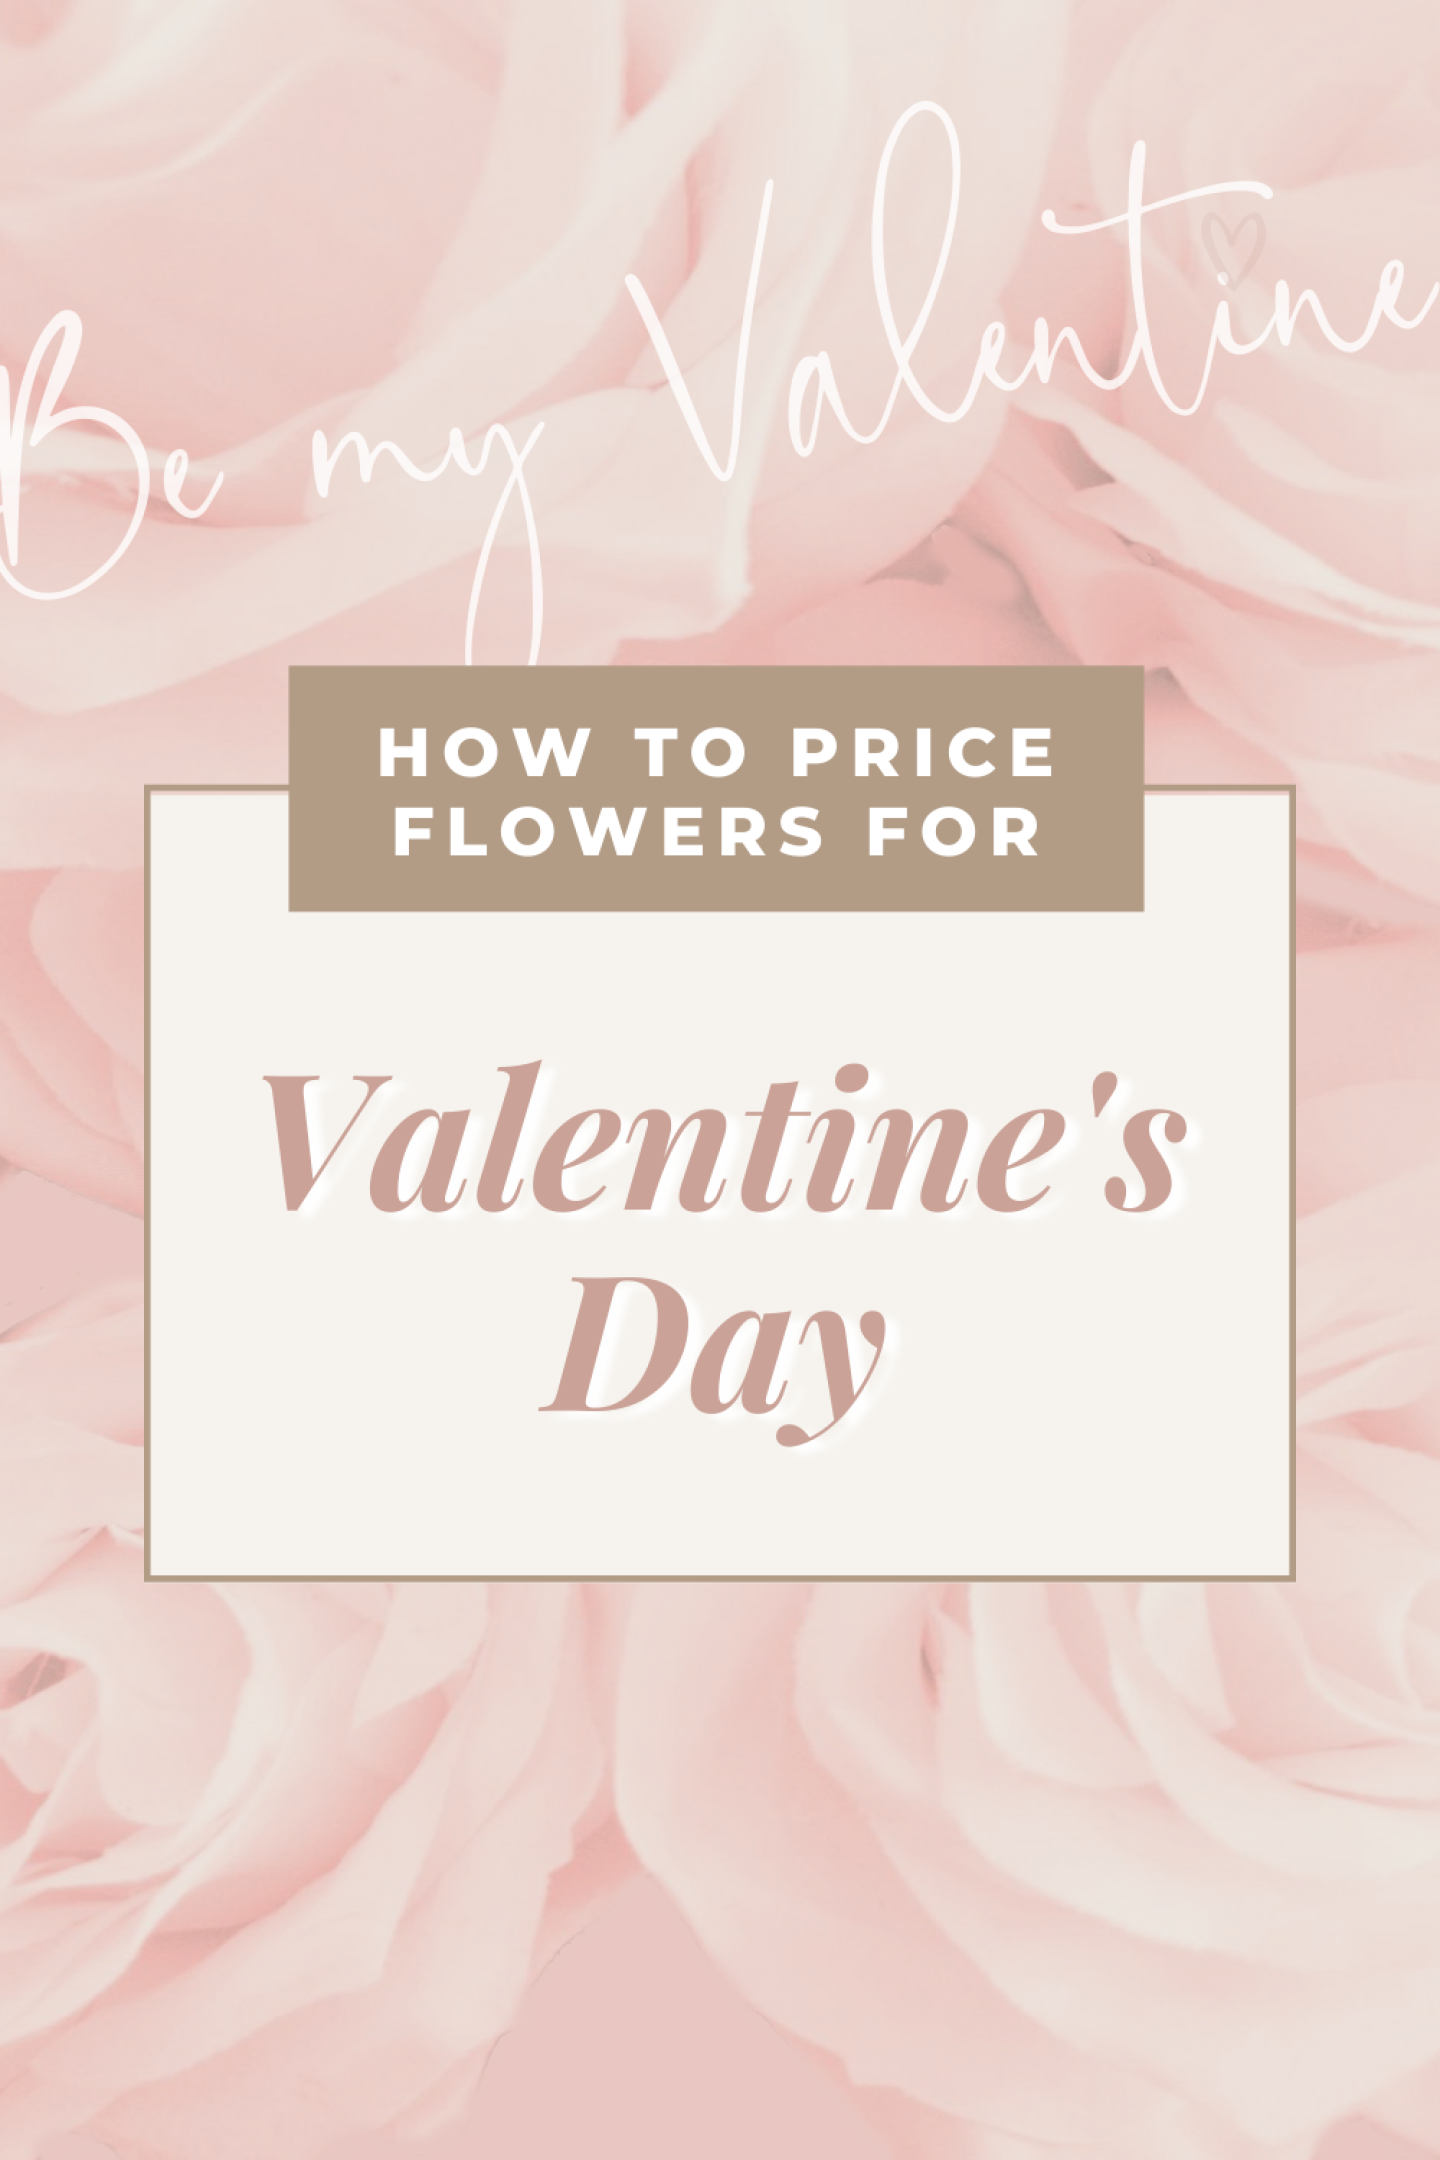 How to Price Flowers for Valentine's Day